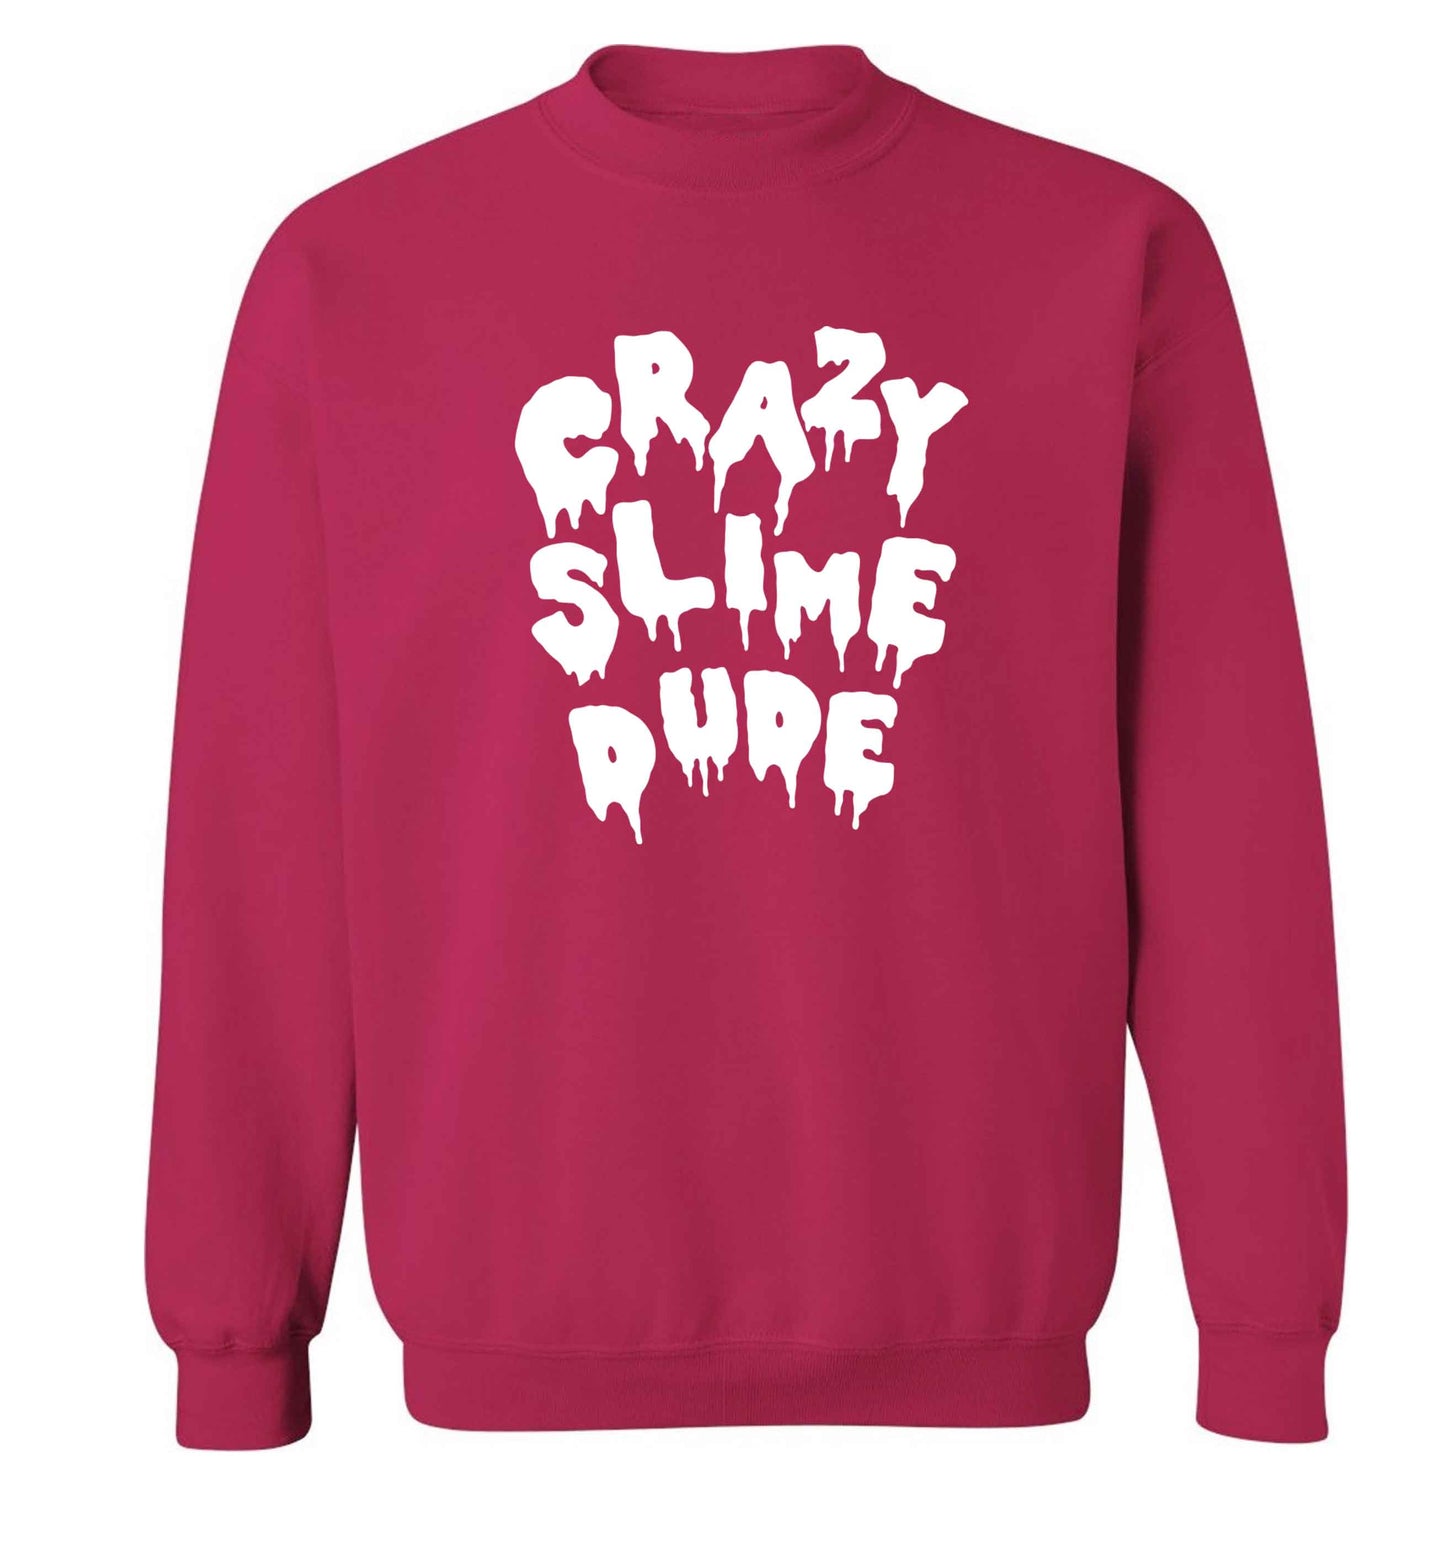 Crazy slime dude adult's unisex pink sweater 2XL